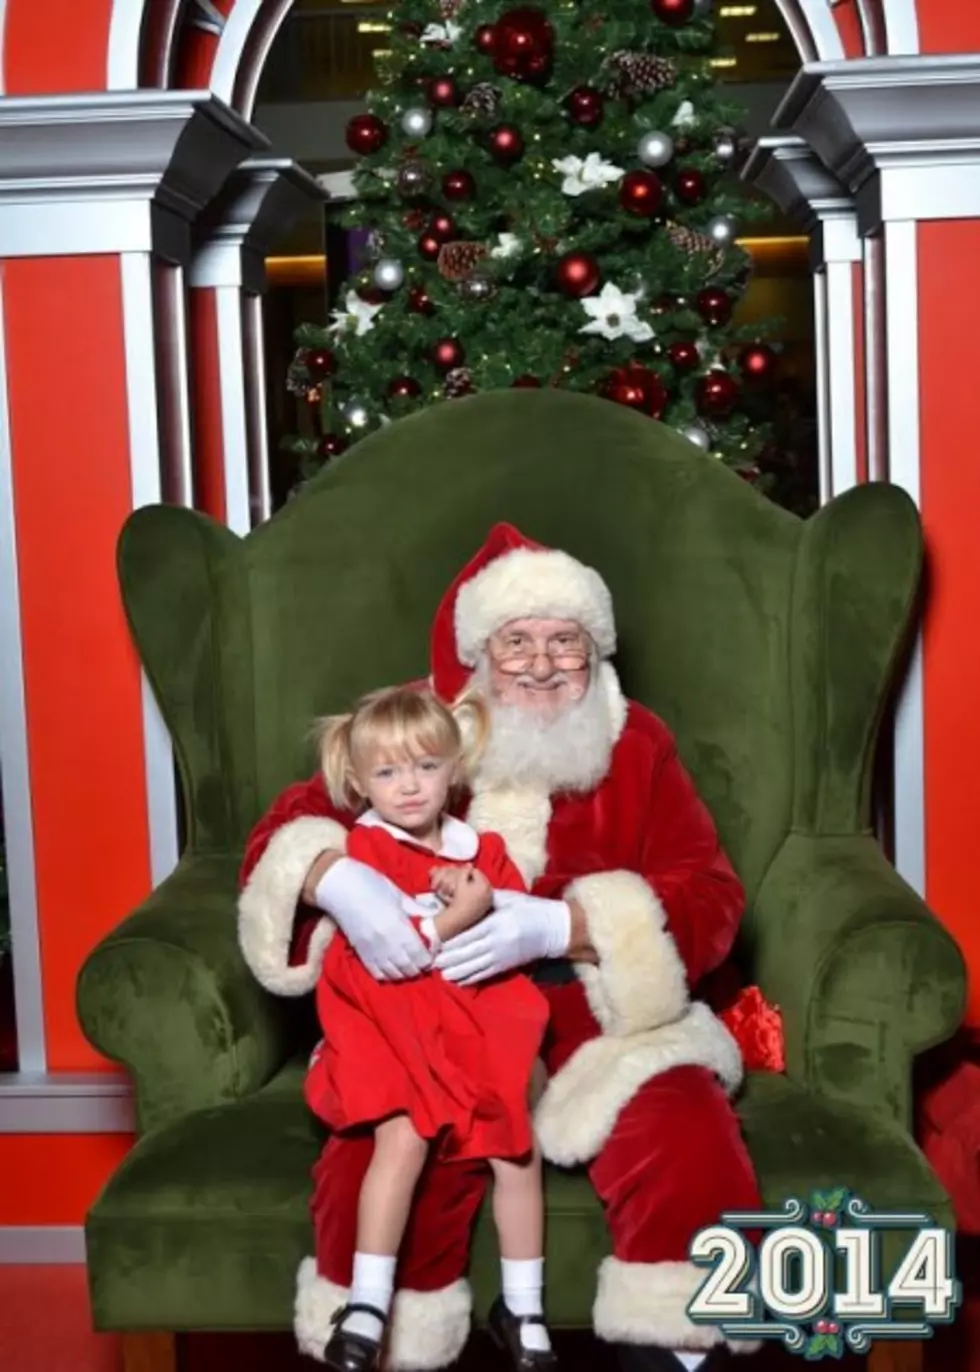 My Daughter Met Santa Claus and It Was Amazing [PHOTOS]